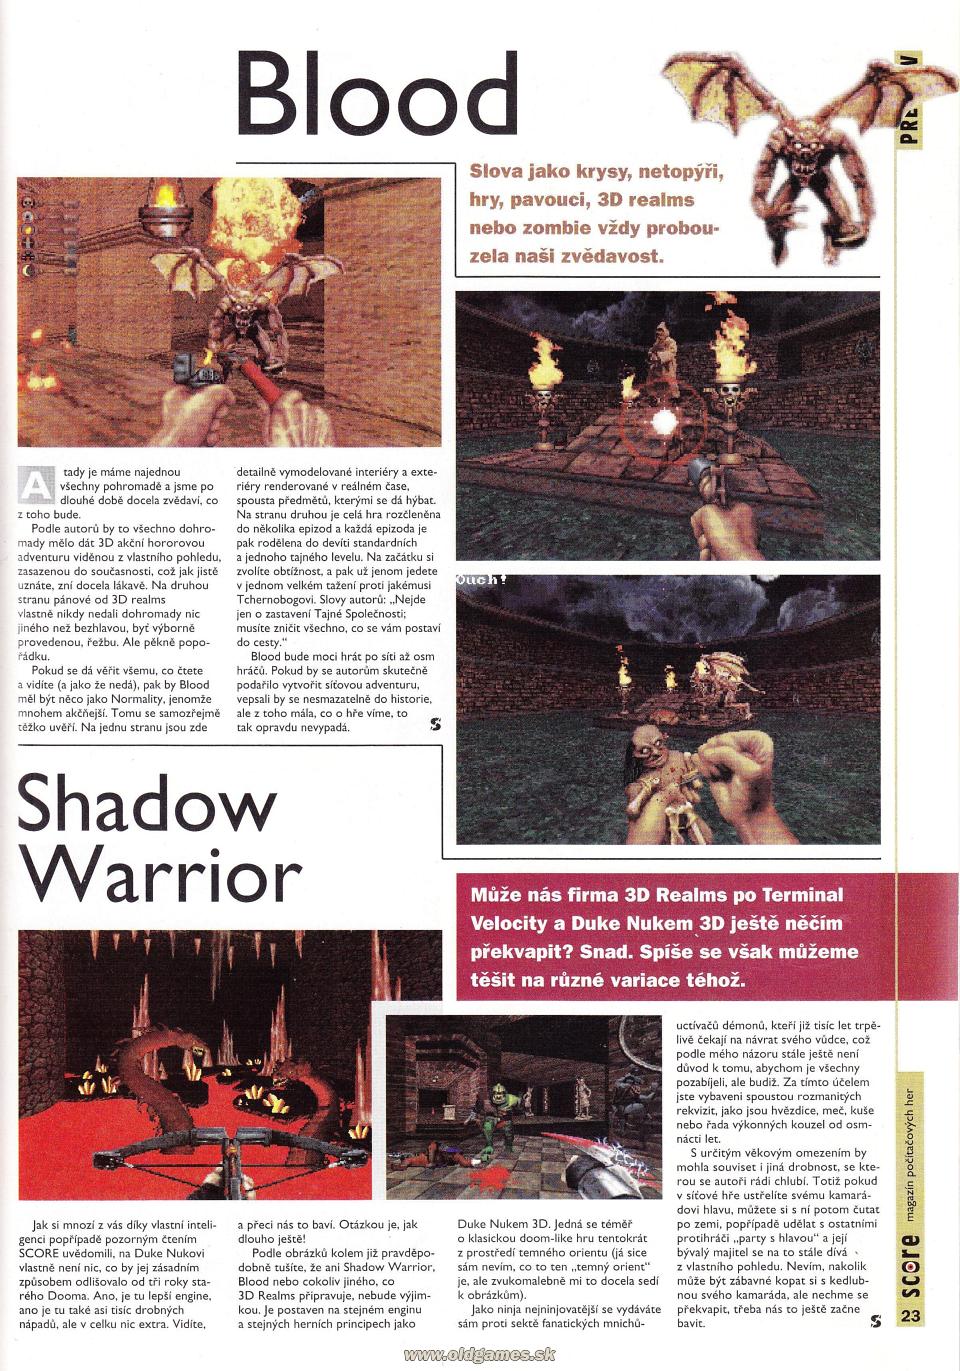 Preview: Blood, Shadow Warrior